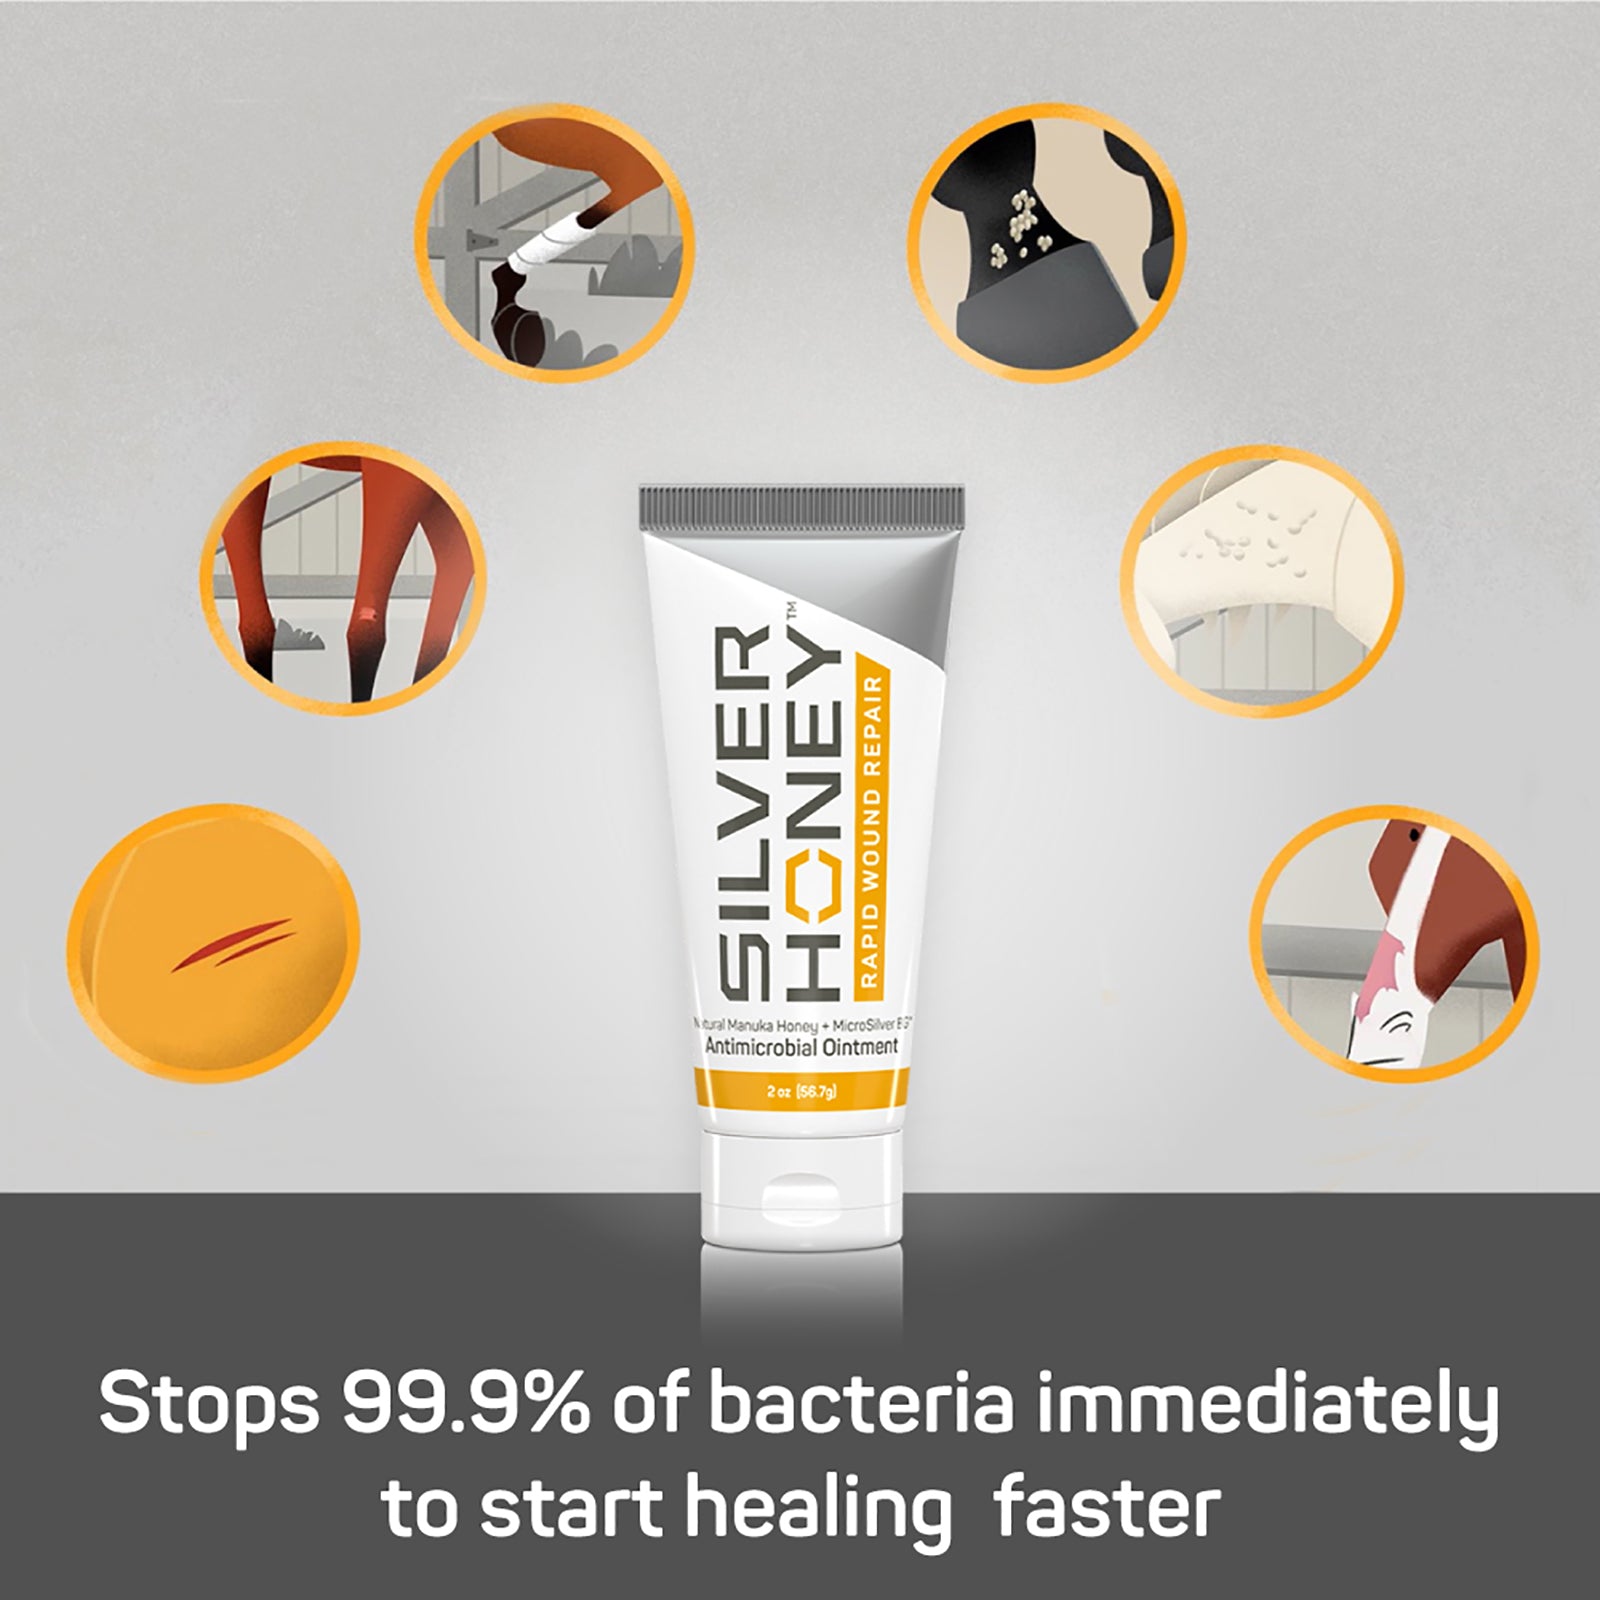 Silver honey rapid wound repair antimicrobial ointment stops 99.9% of bacterial immediately to start healing faster.